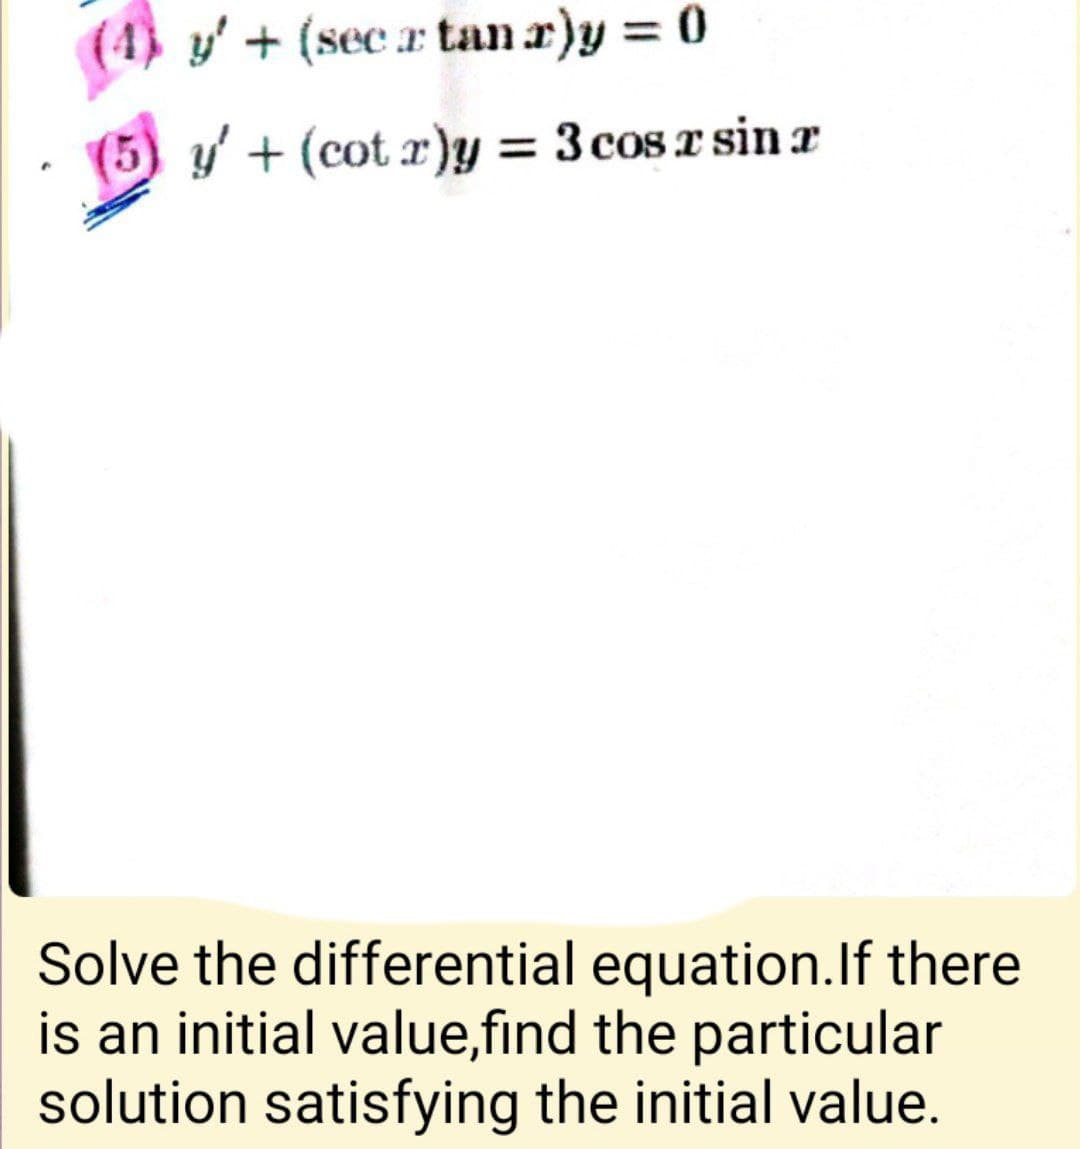 (4) y' + (sec a tan r)y = 0
(5) y' + (cot r)y = 3 cos x sin a
Solve the differential equation.lf there
is an initial value,find the particular
solution satisfying the initial value.
